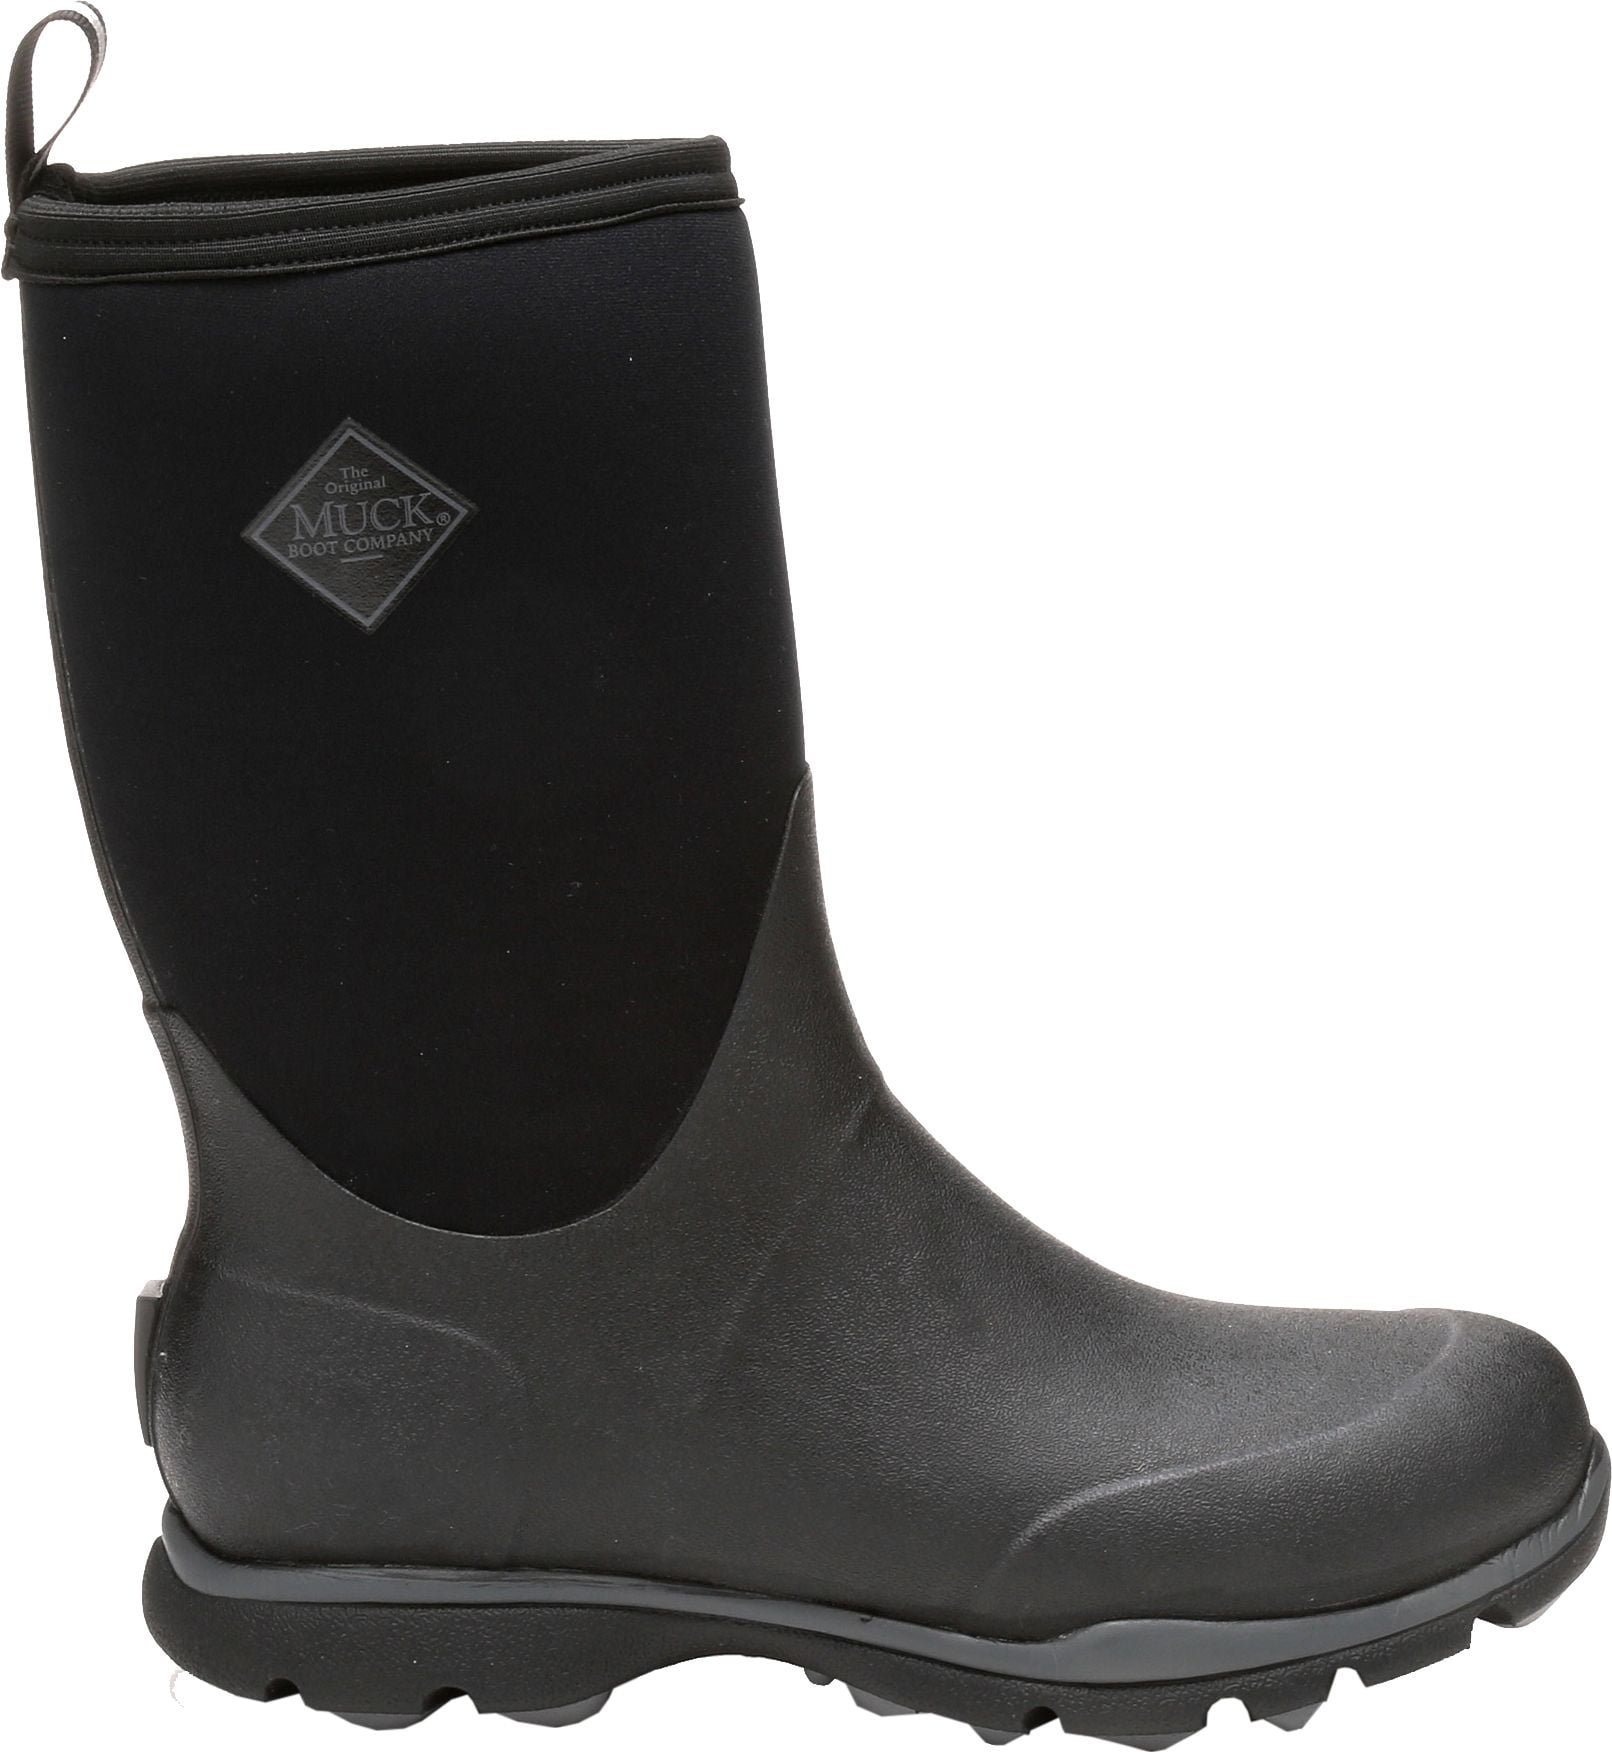 Muck Boot Company - Muck Boots Men's Arctic Excursion Mid Waterproof ...